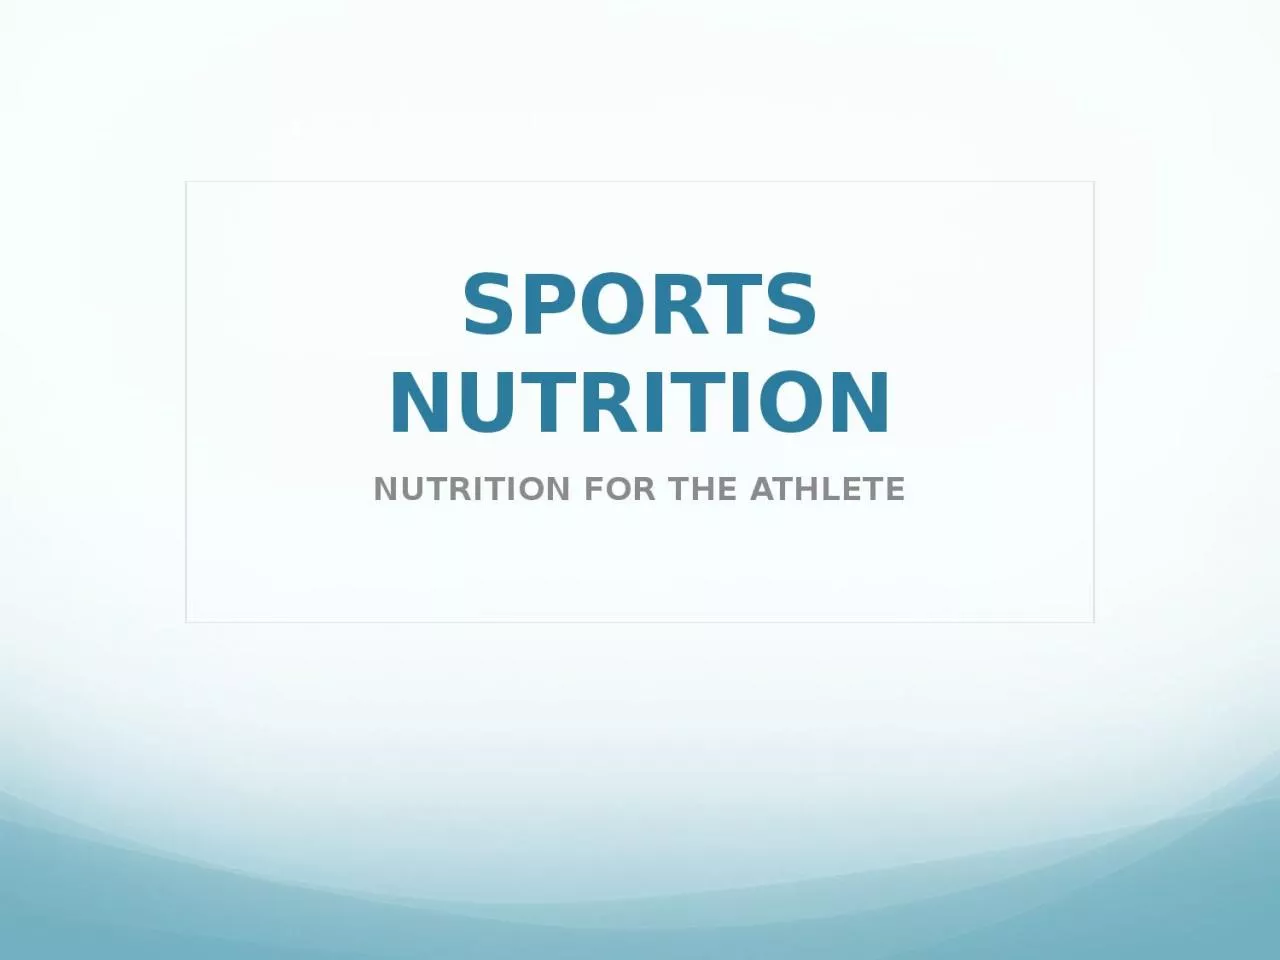 SPORTS NUTRITION NUTRITION FOR THE ATHLETE